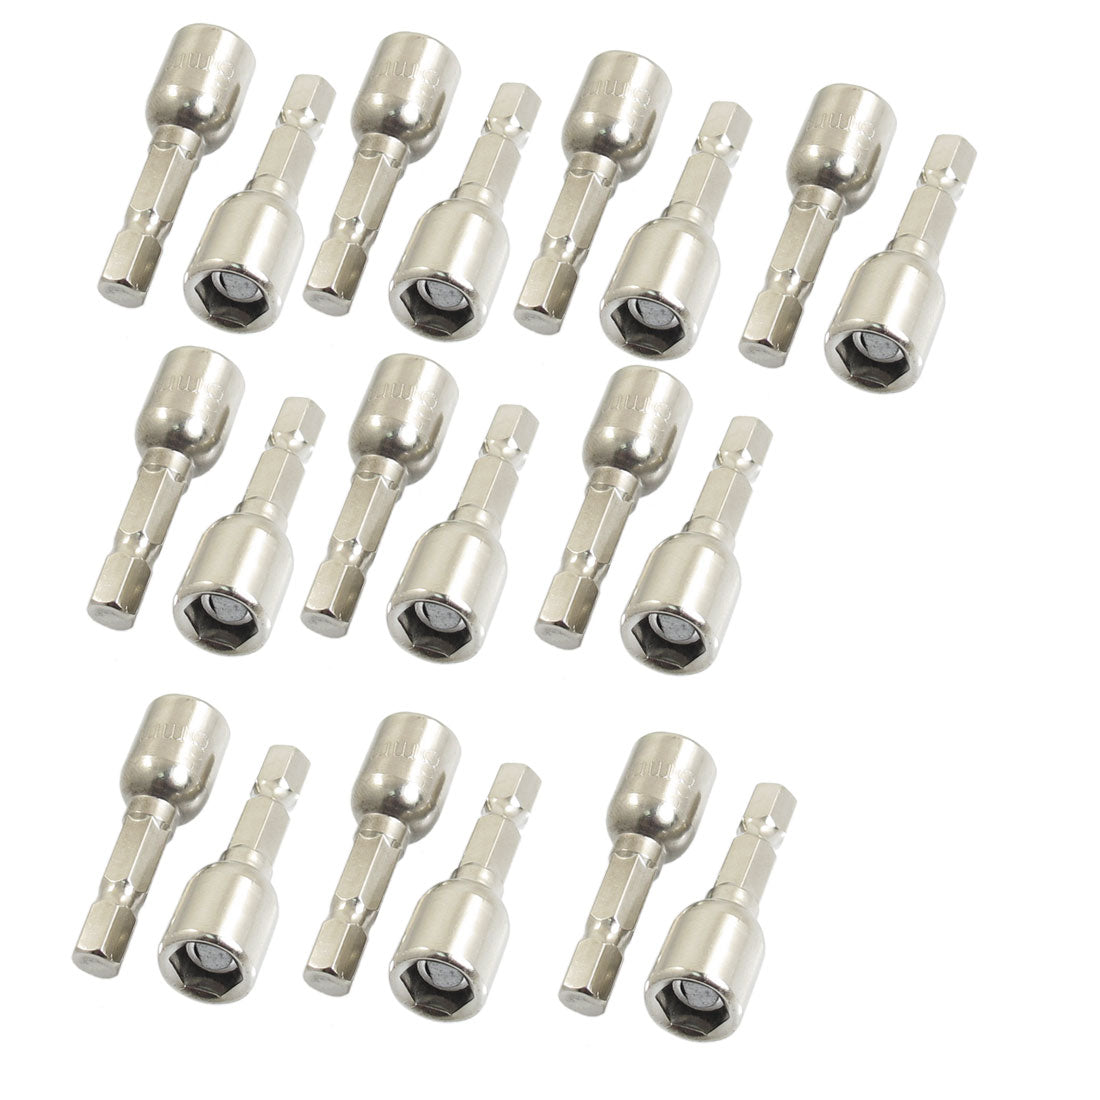 uxcell Uxcell 20 Pcs Magnetic 1/4" Shank 8mm Hex Socket Spanner Nut Setter Hexagon Driver Bits